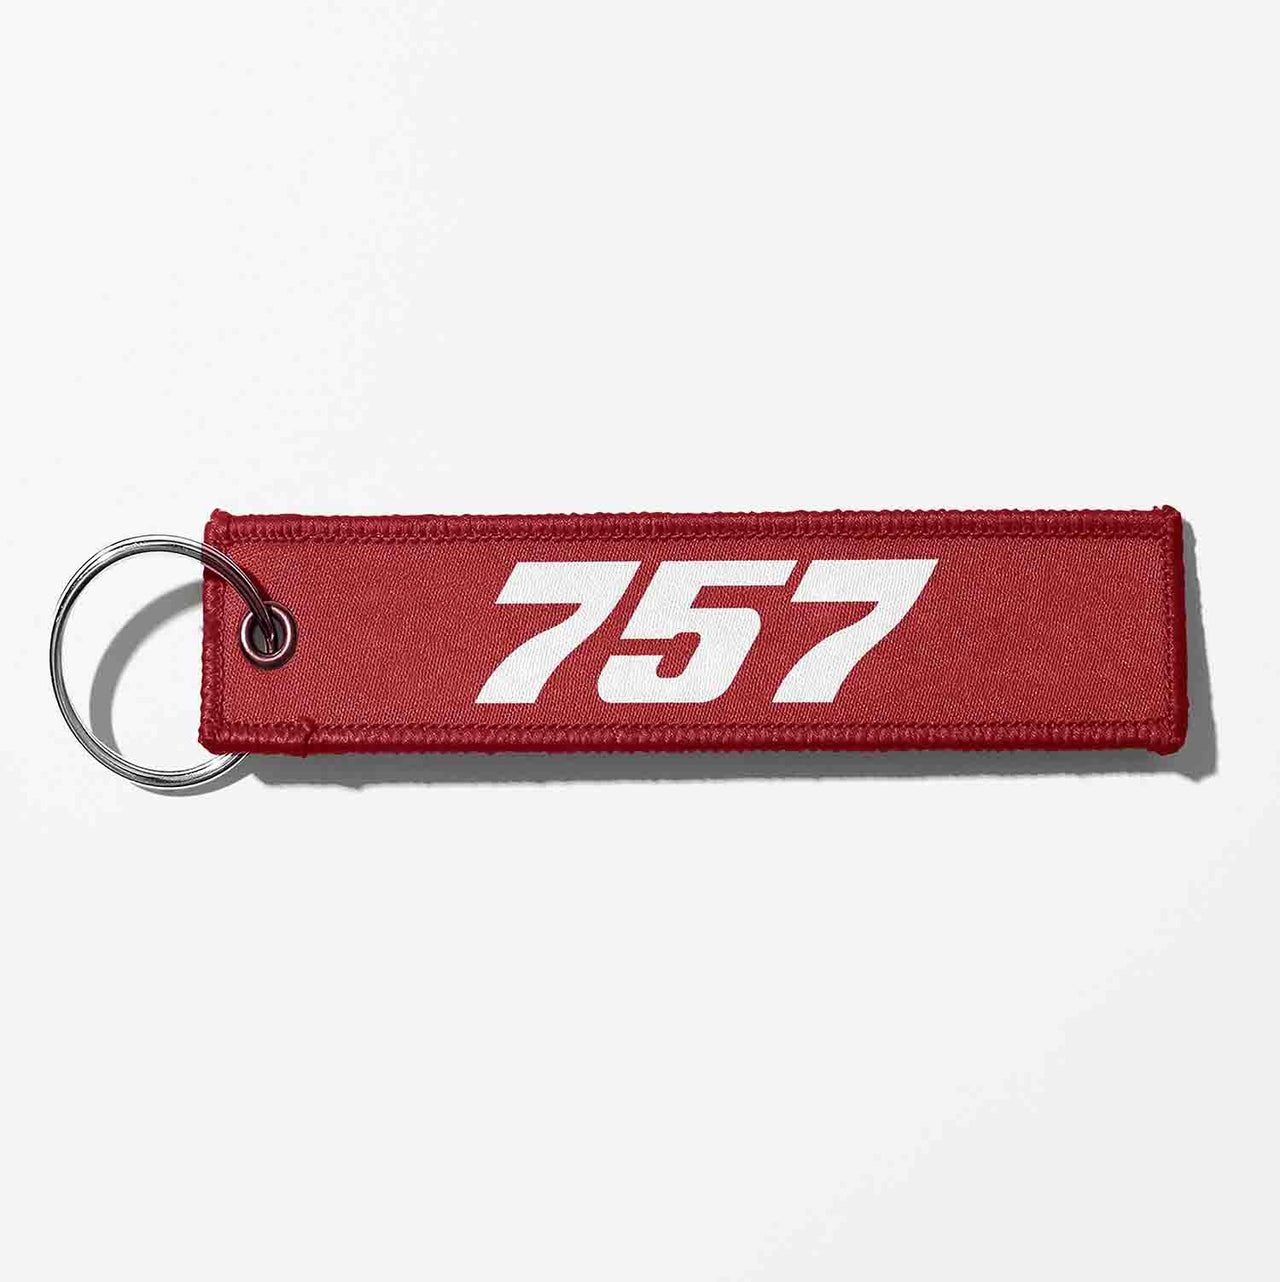 Boeing 757 Flat Text Designed Key Chains